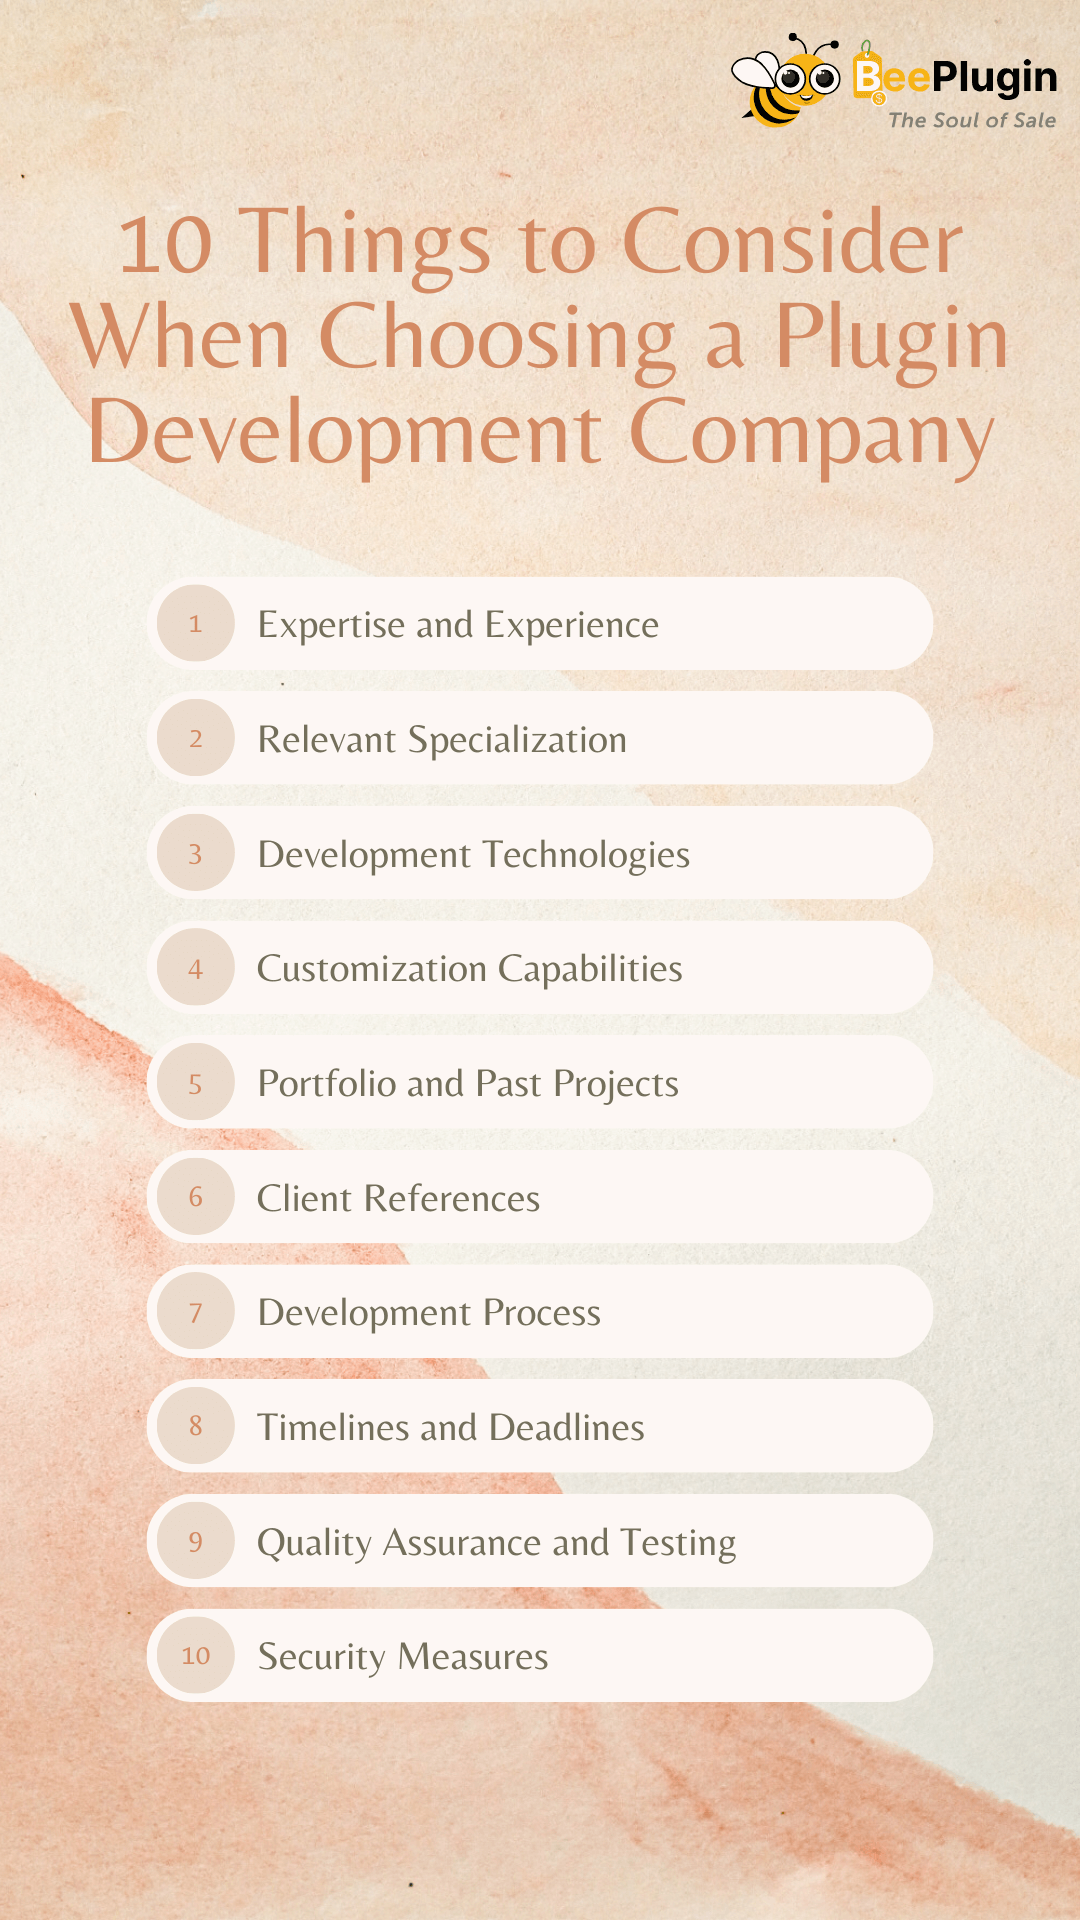 10 Things to Consider When Choosing a Plugin Development Company